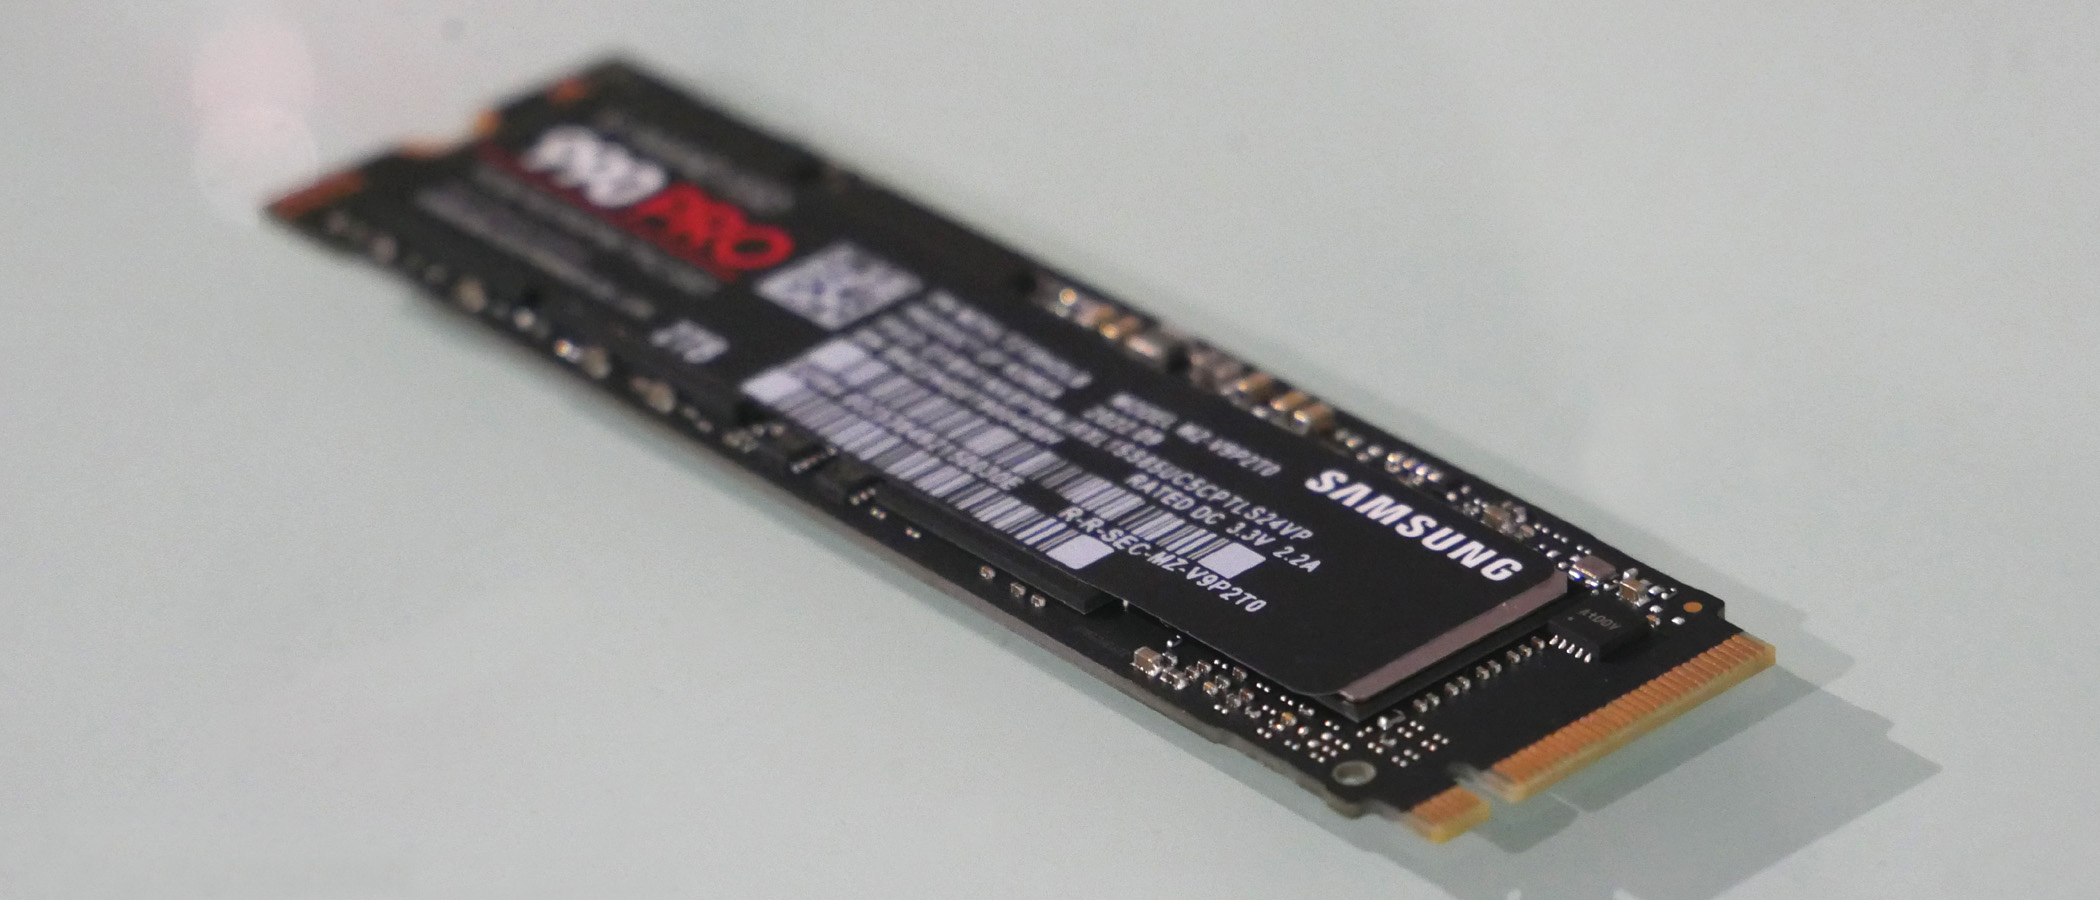 The Samsung 990 Pro SSD is built for PS5 and DirectStorage